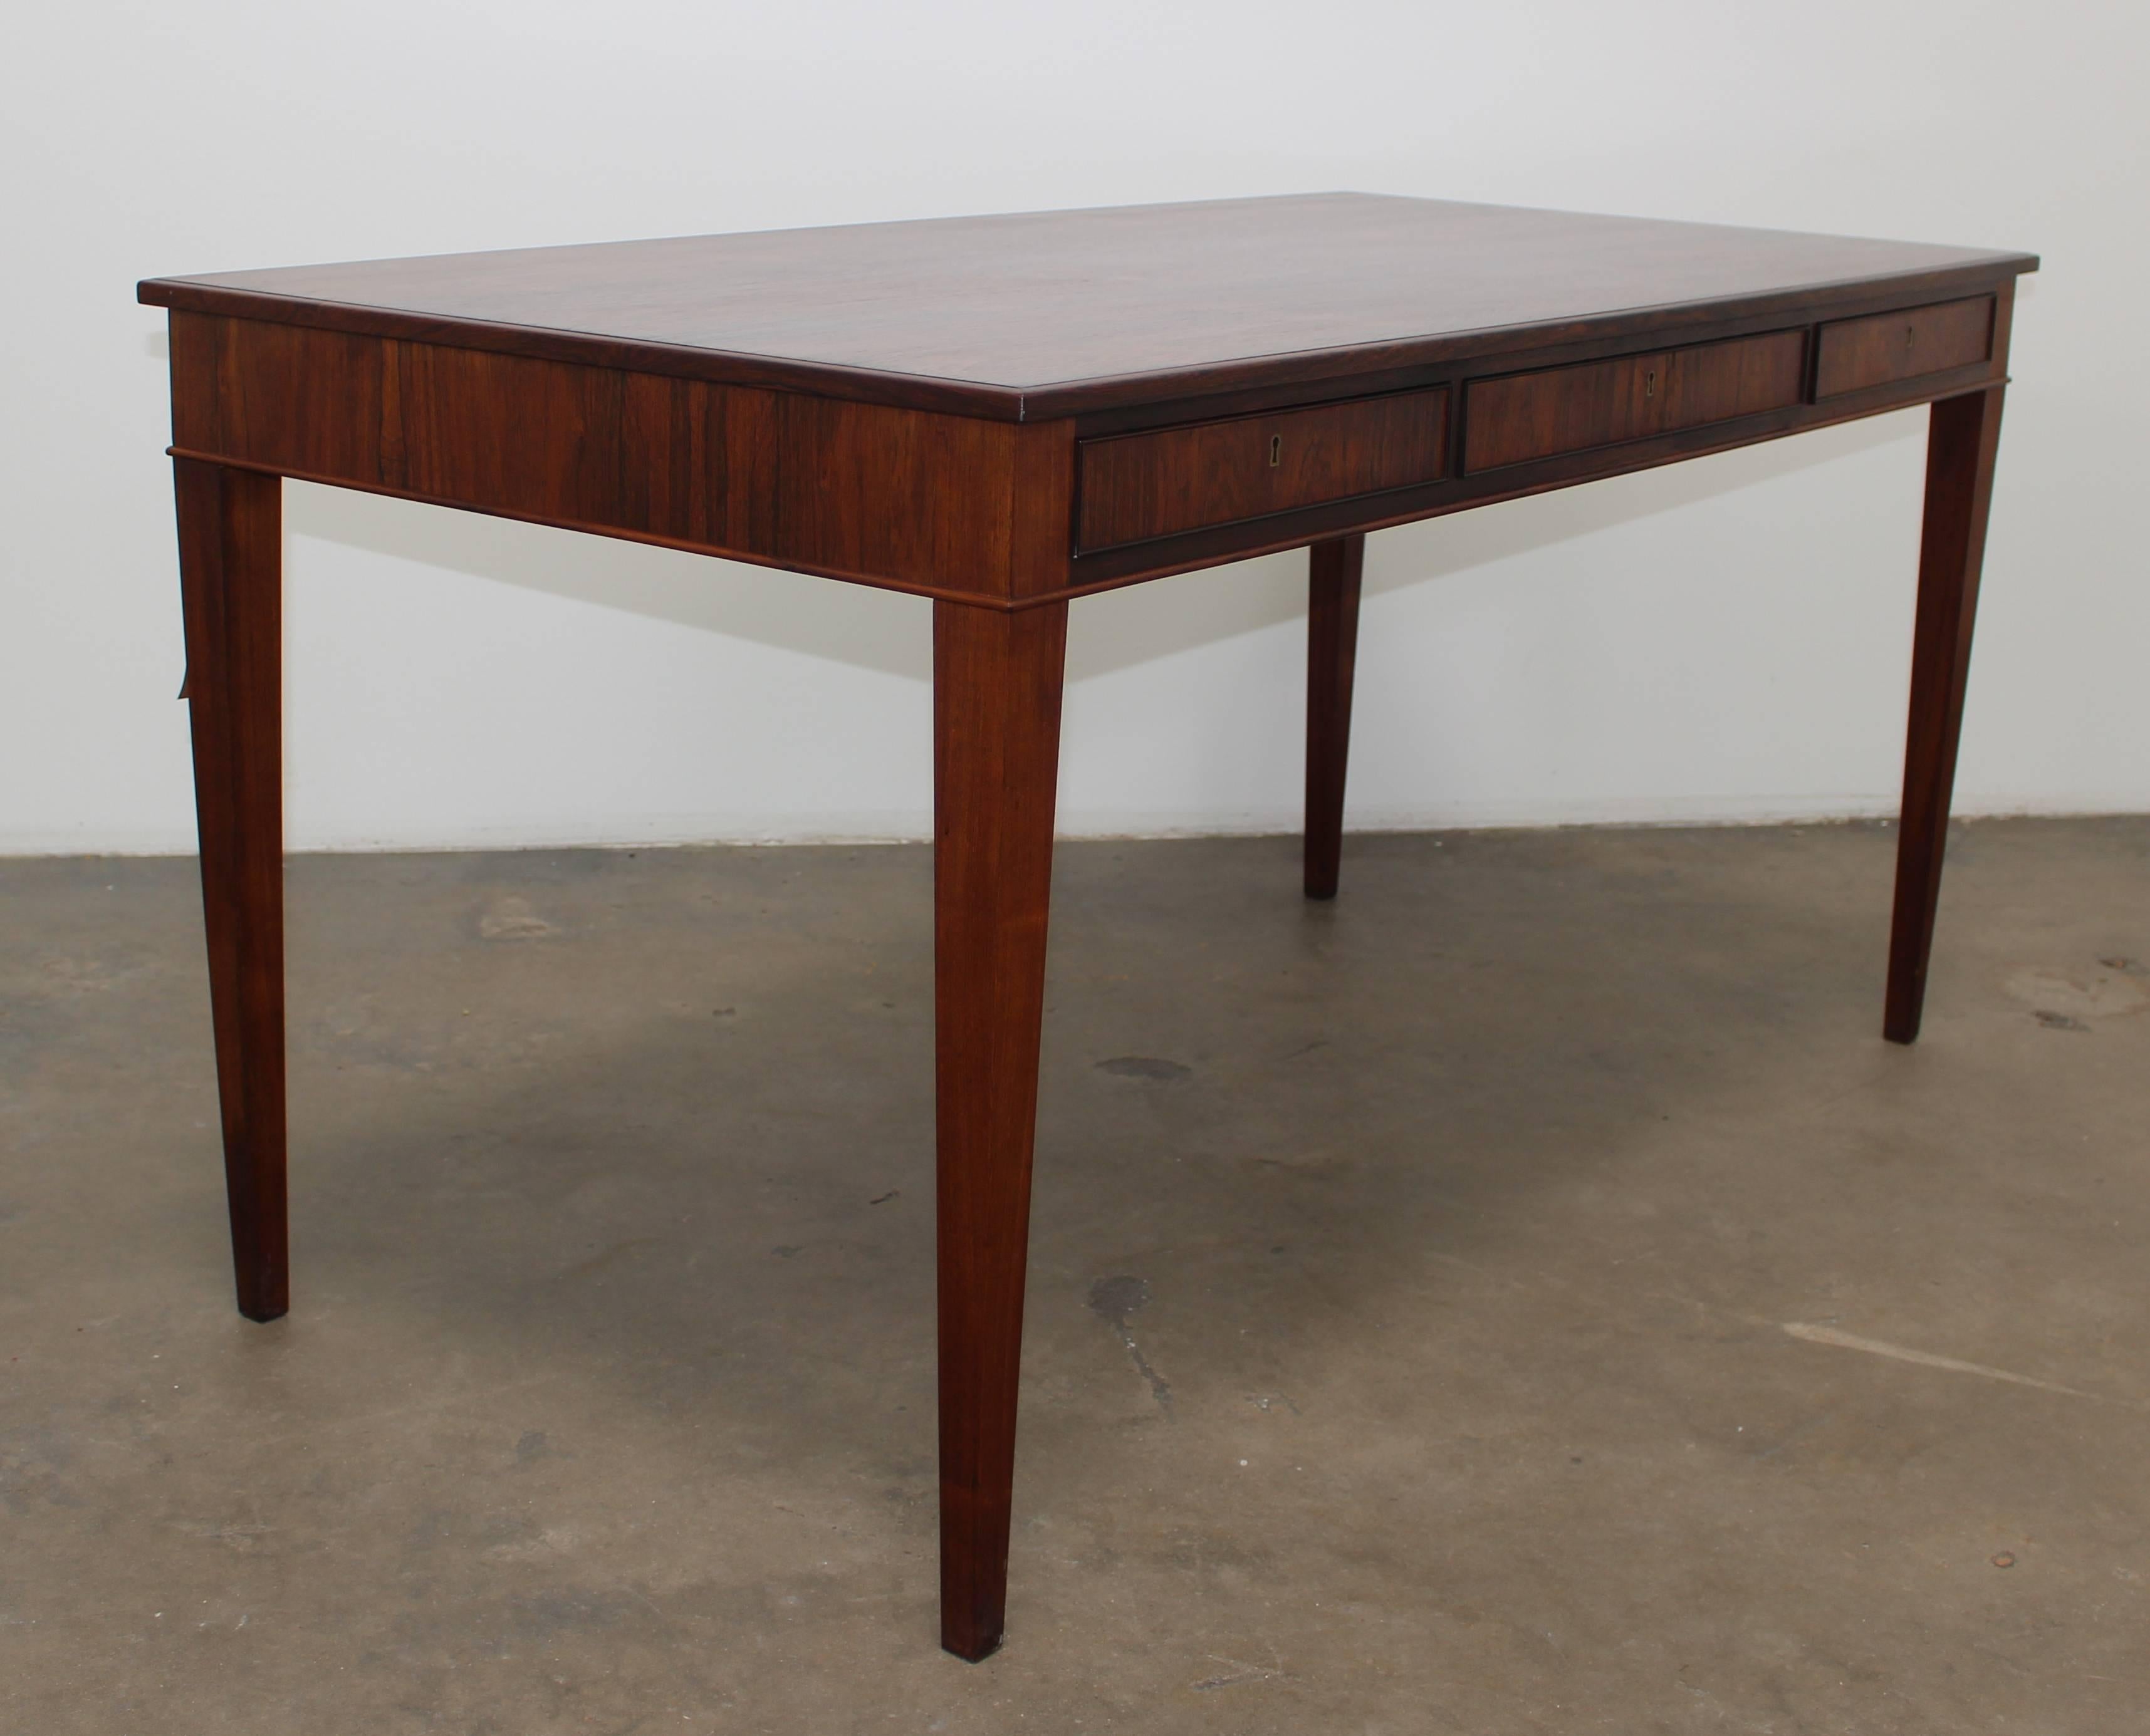 Beautiful dark rosewood desk that is modeled in the style of Frits Henningsen. This beautiful writing table is a minimalist design with three drawers that are inconspicuously hidden near the tabletop. All of the drawers have the original key and